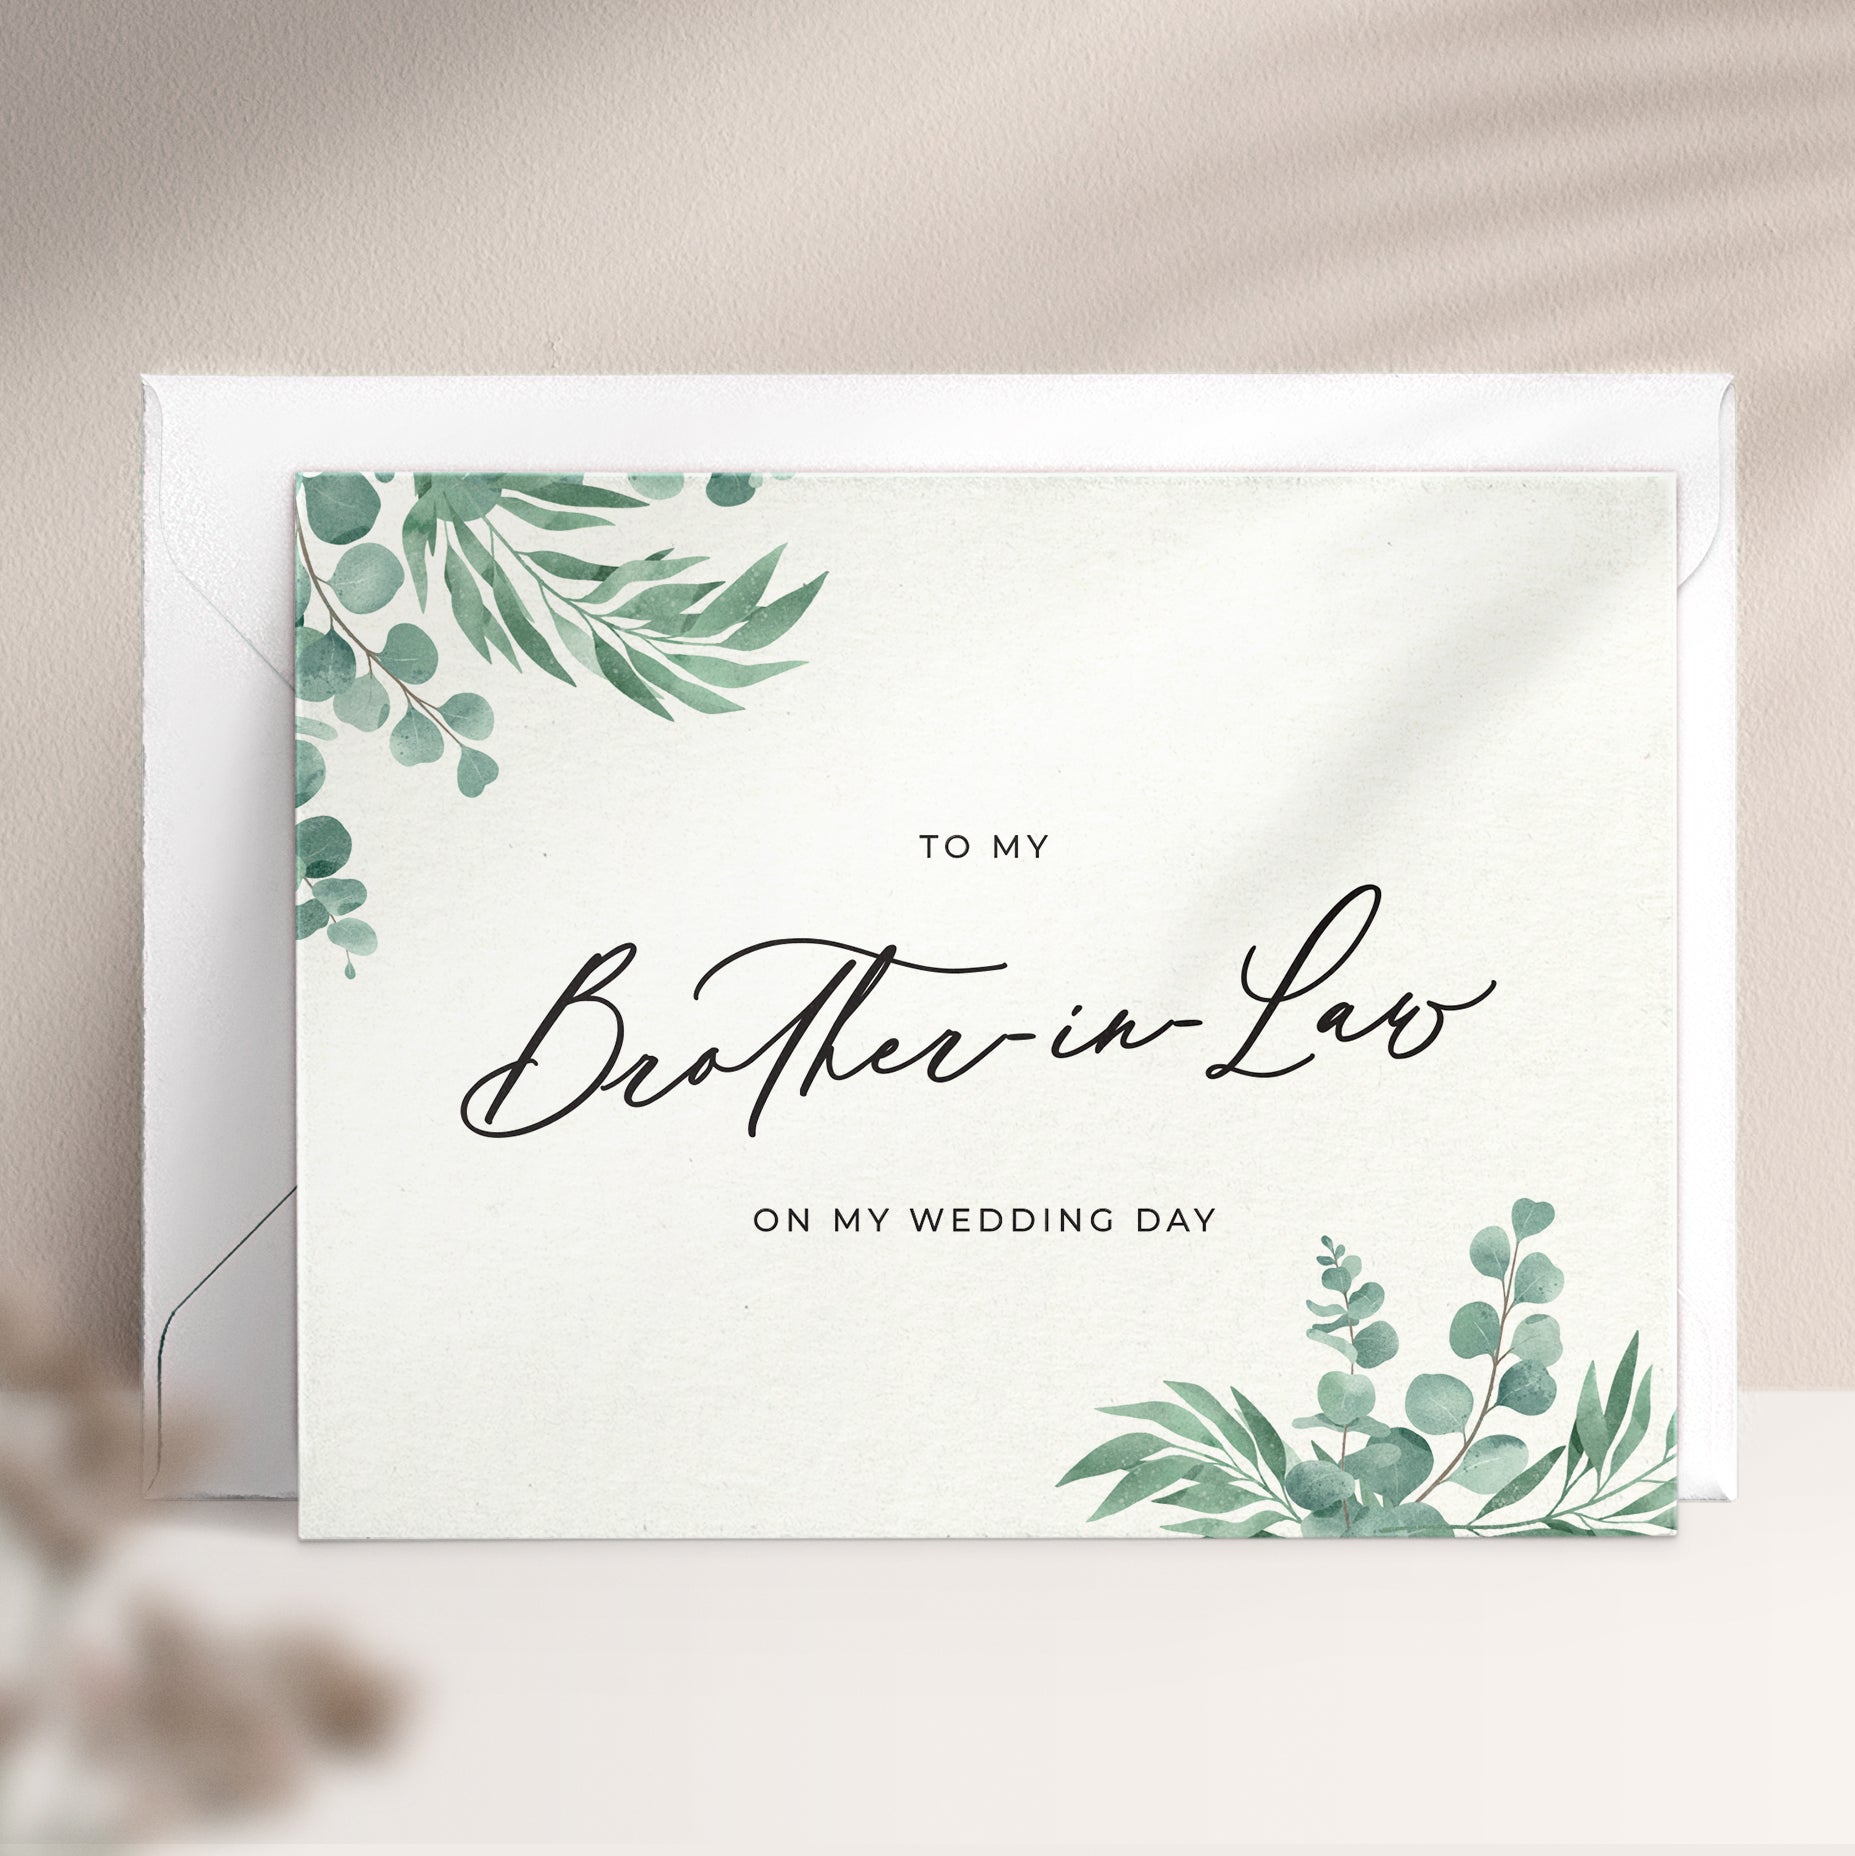 To my brother-in-law on my wedding day note card in greenery design with eucalyptus leaves and calligraphy font from XOXOKristen.